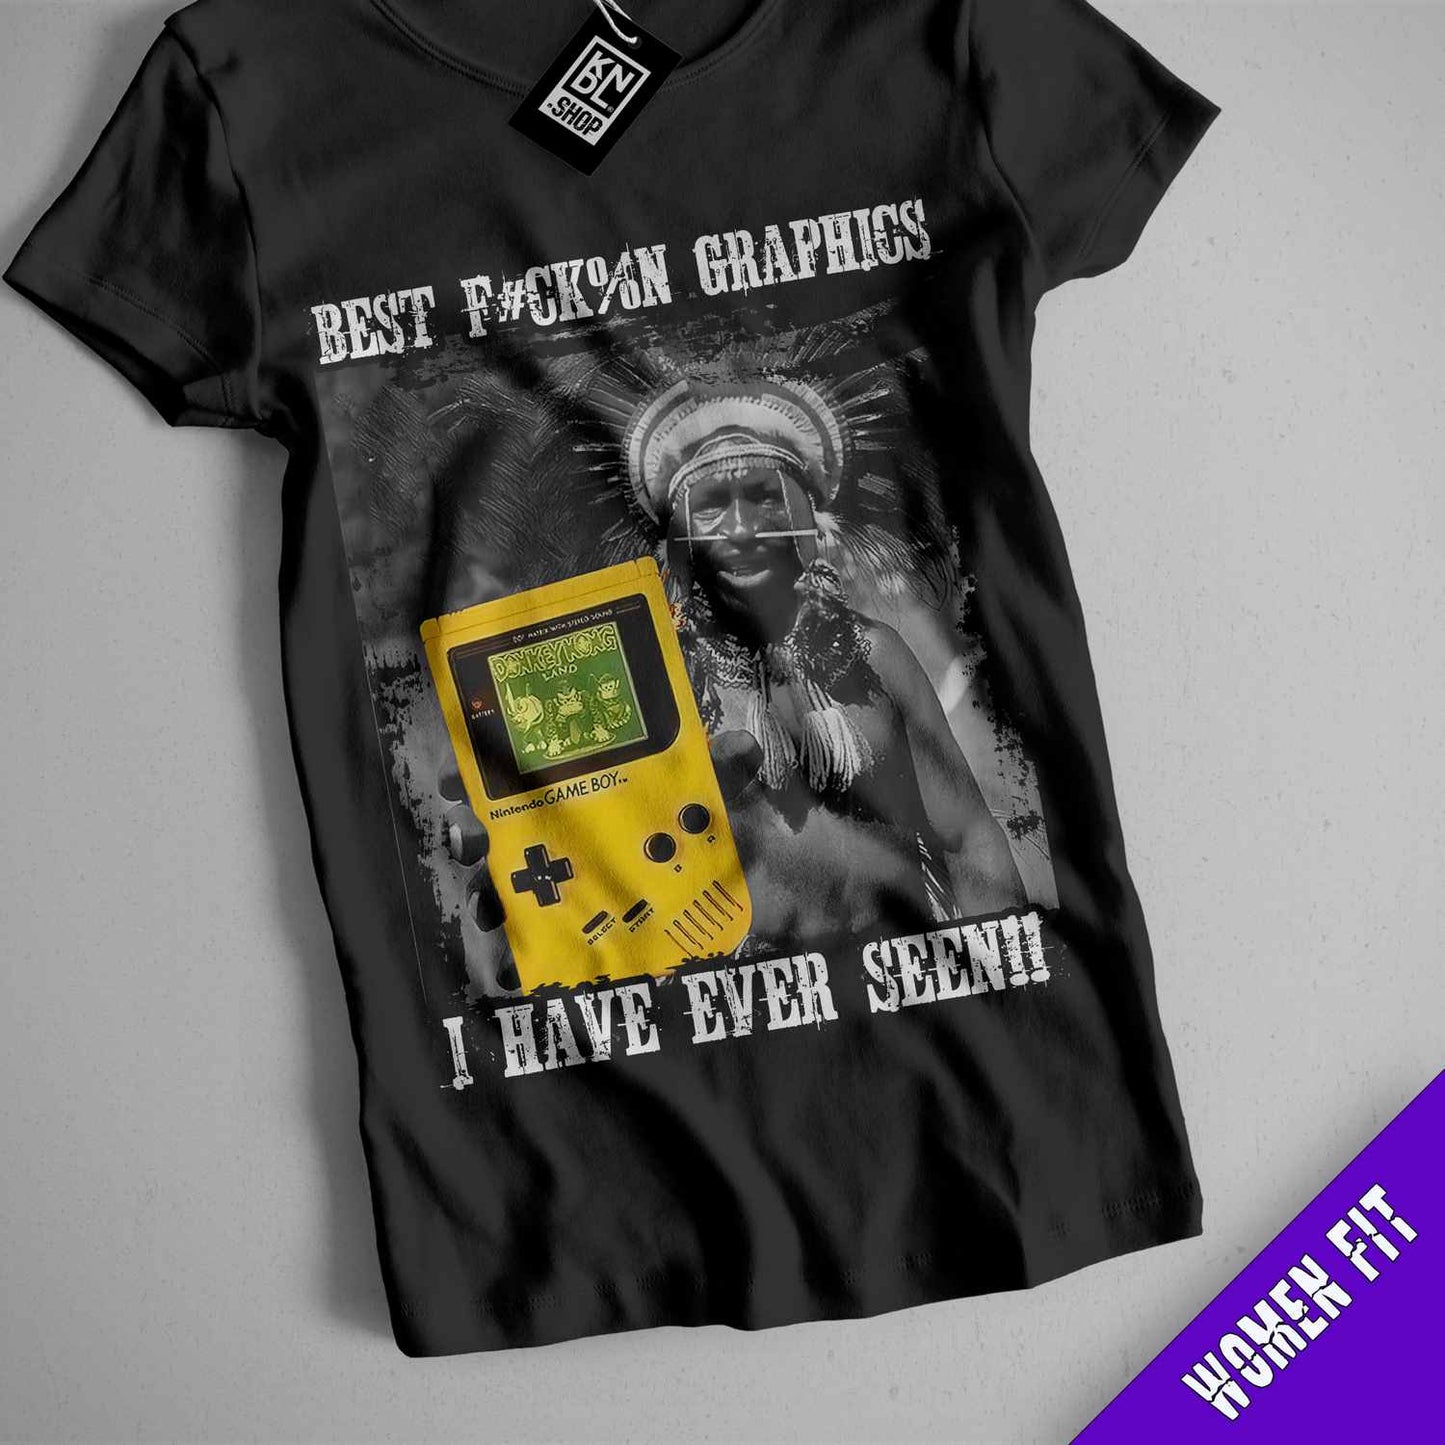 a black shirt with a yellow game boy on it